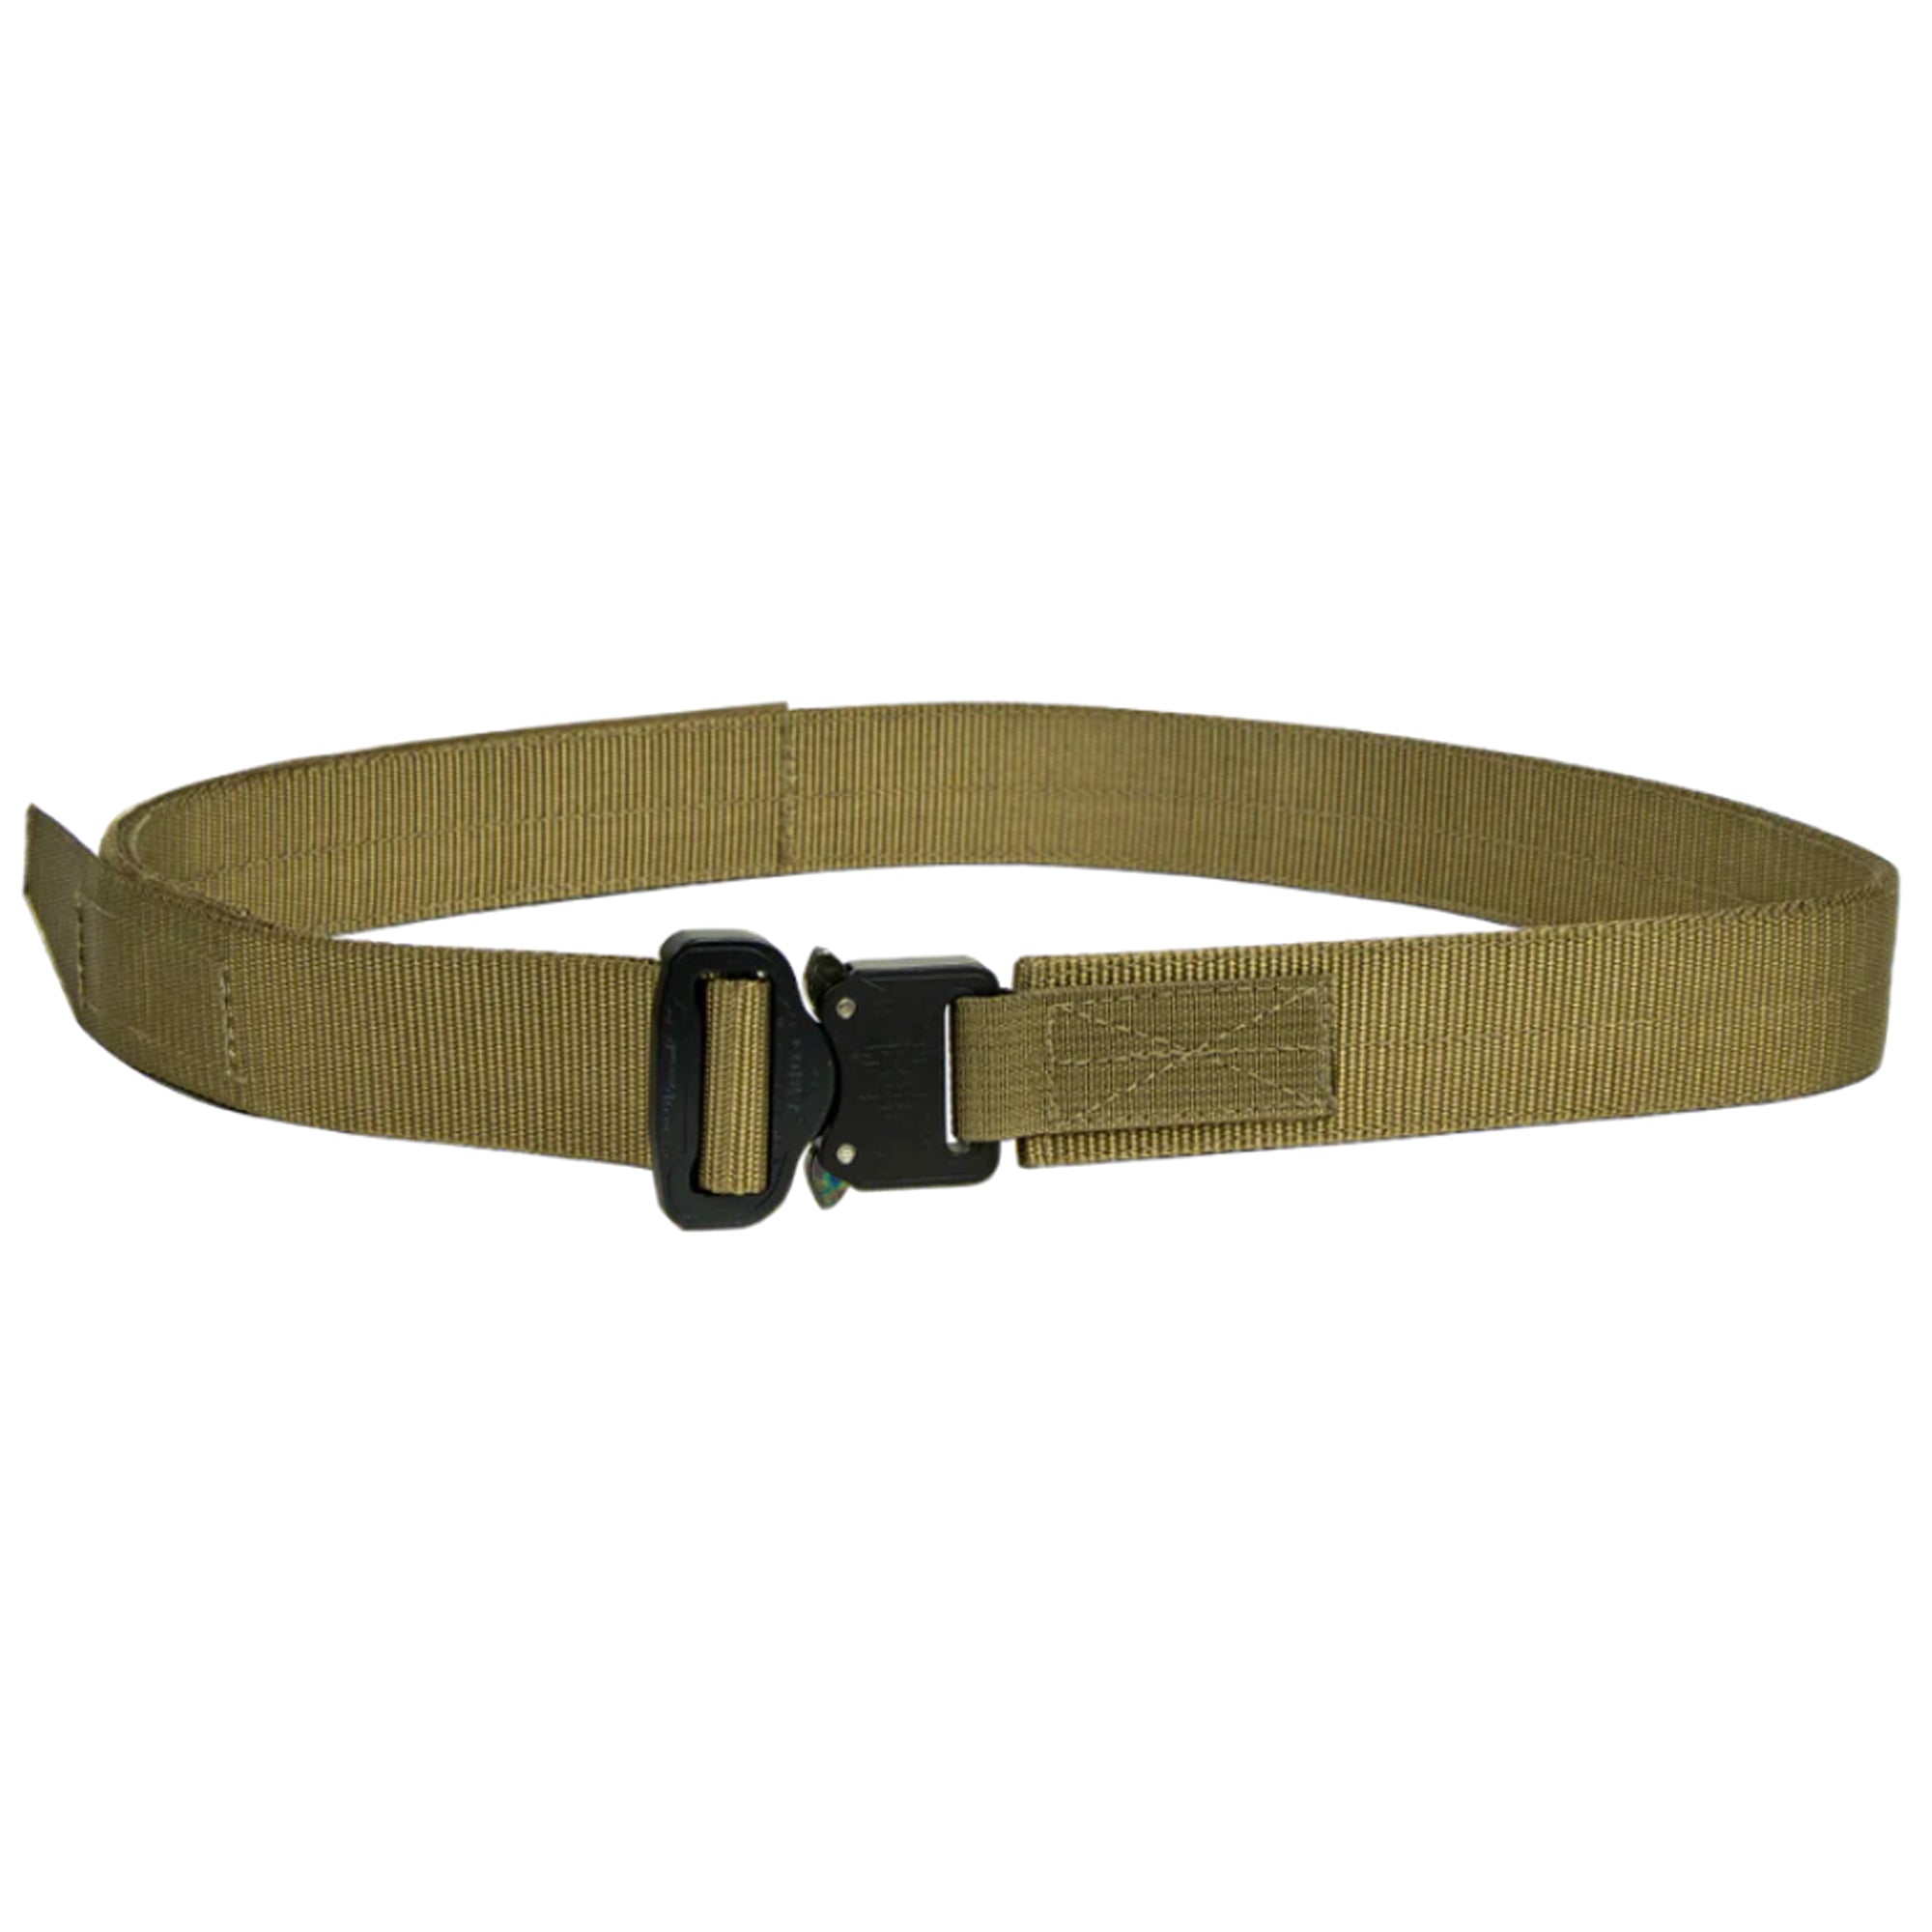 Belts Online: What Makes The Cobra® Buckle A Superior Belt Buckle